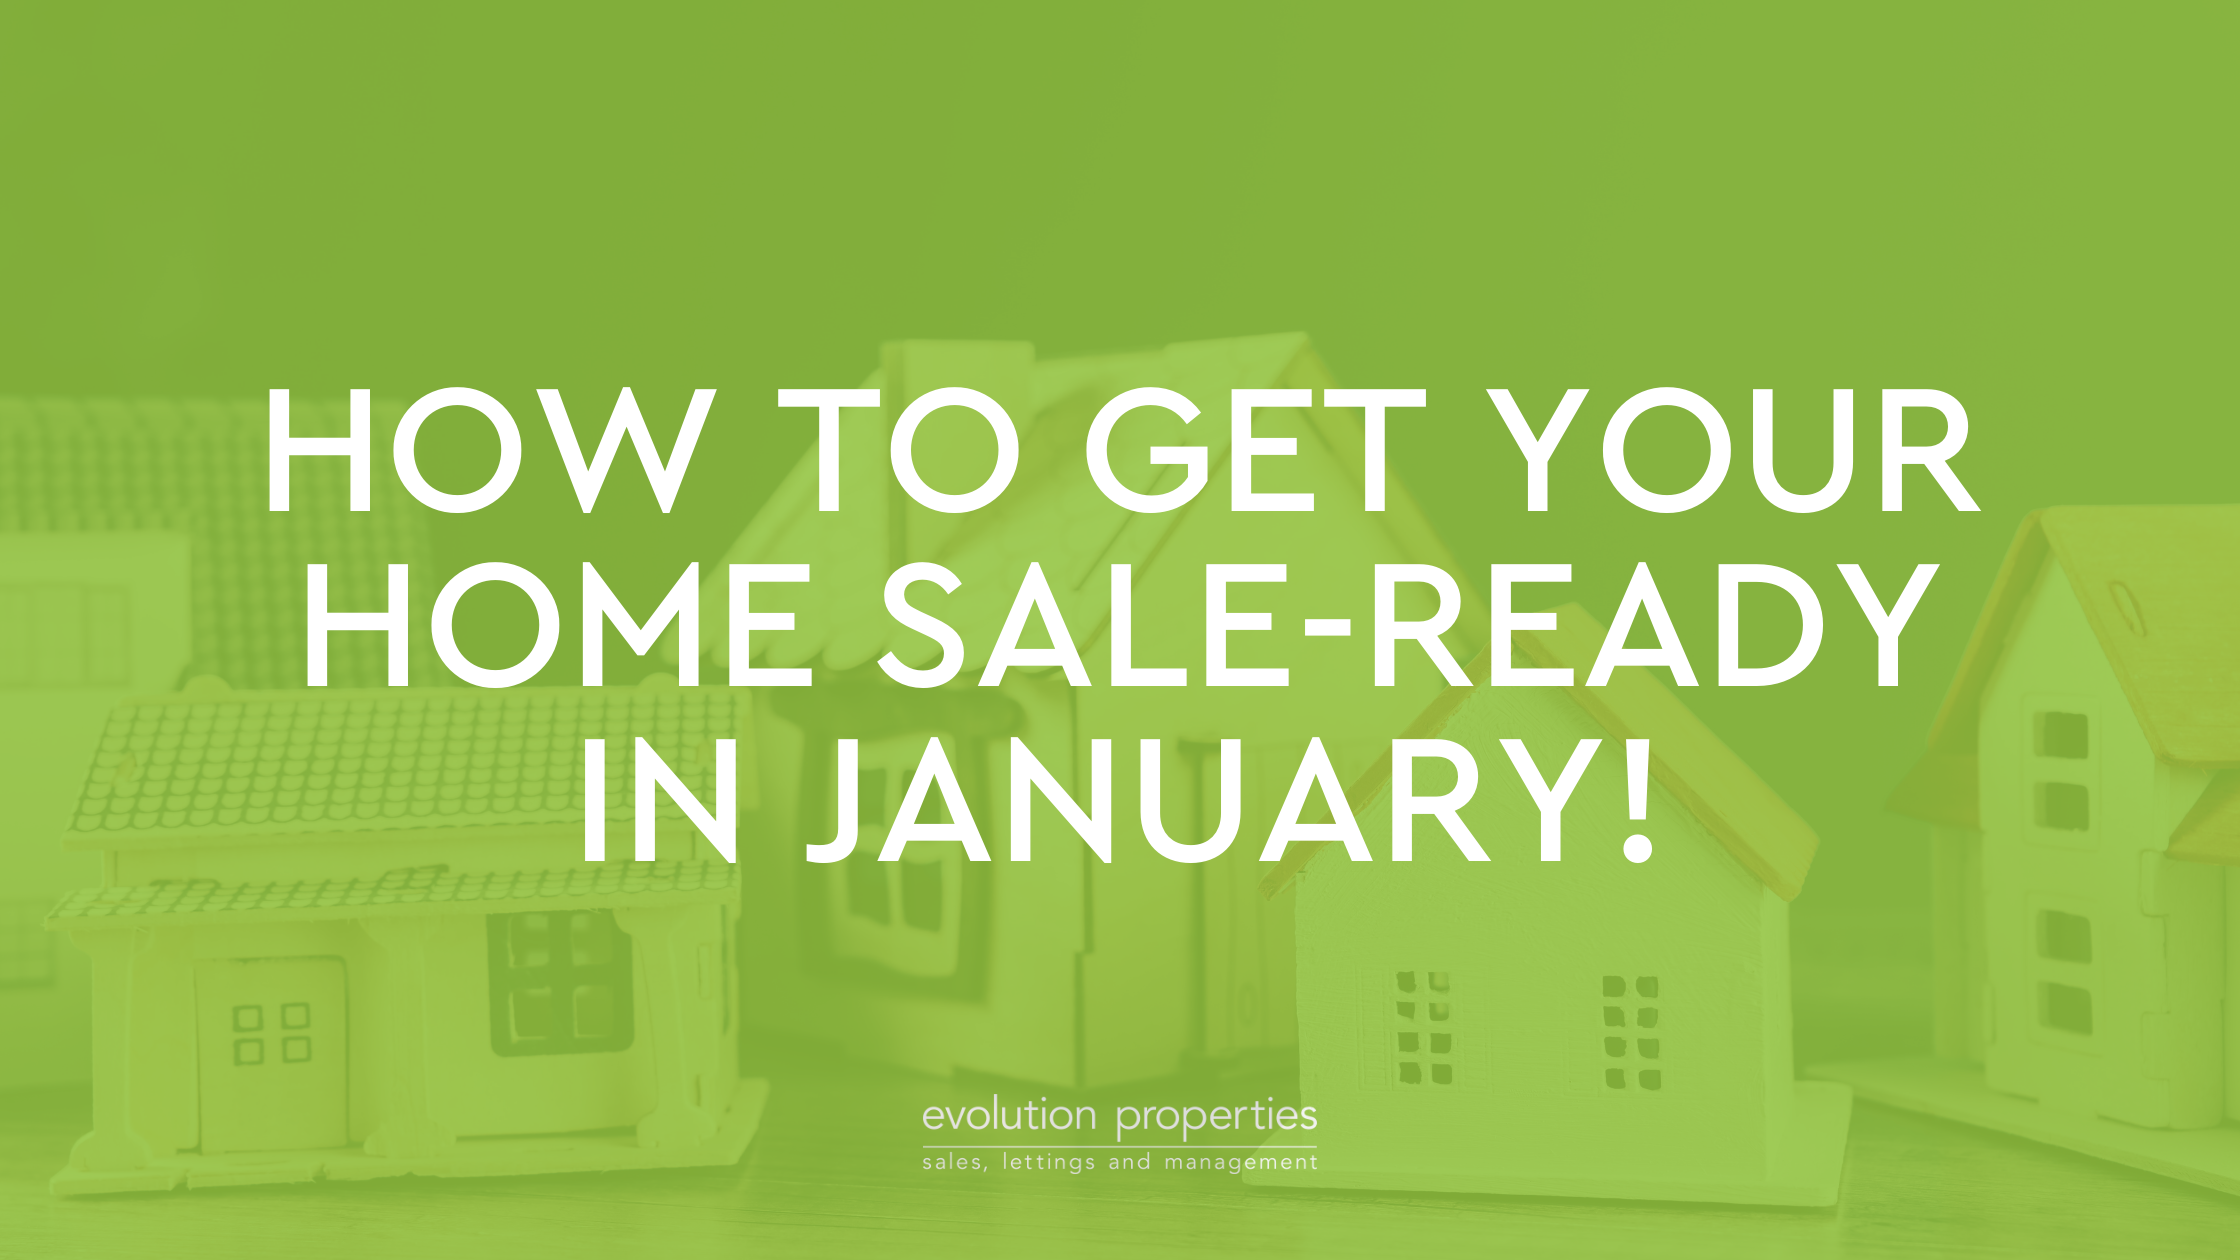 How to get your home sale-ready in January!